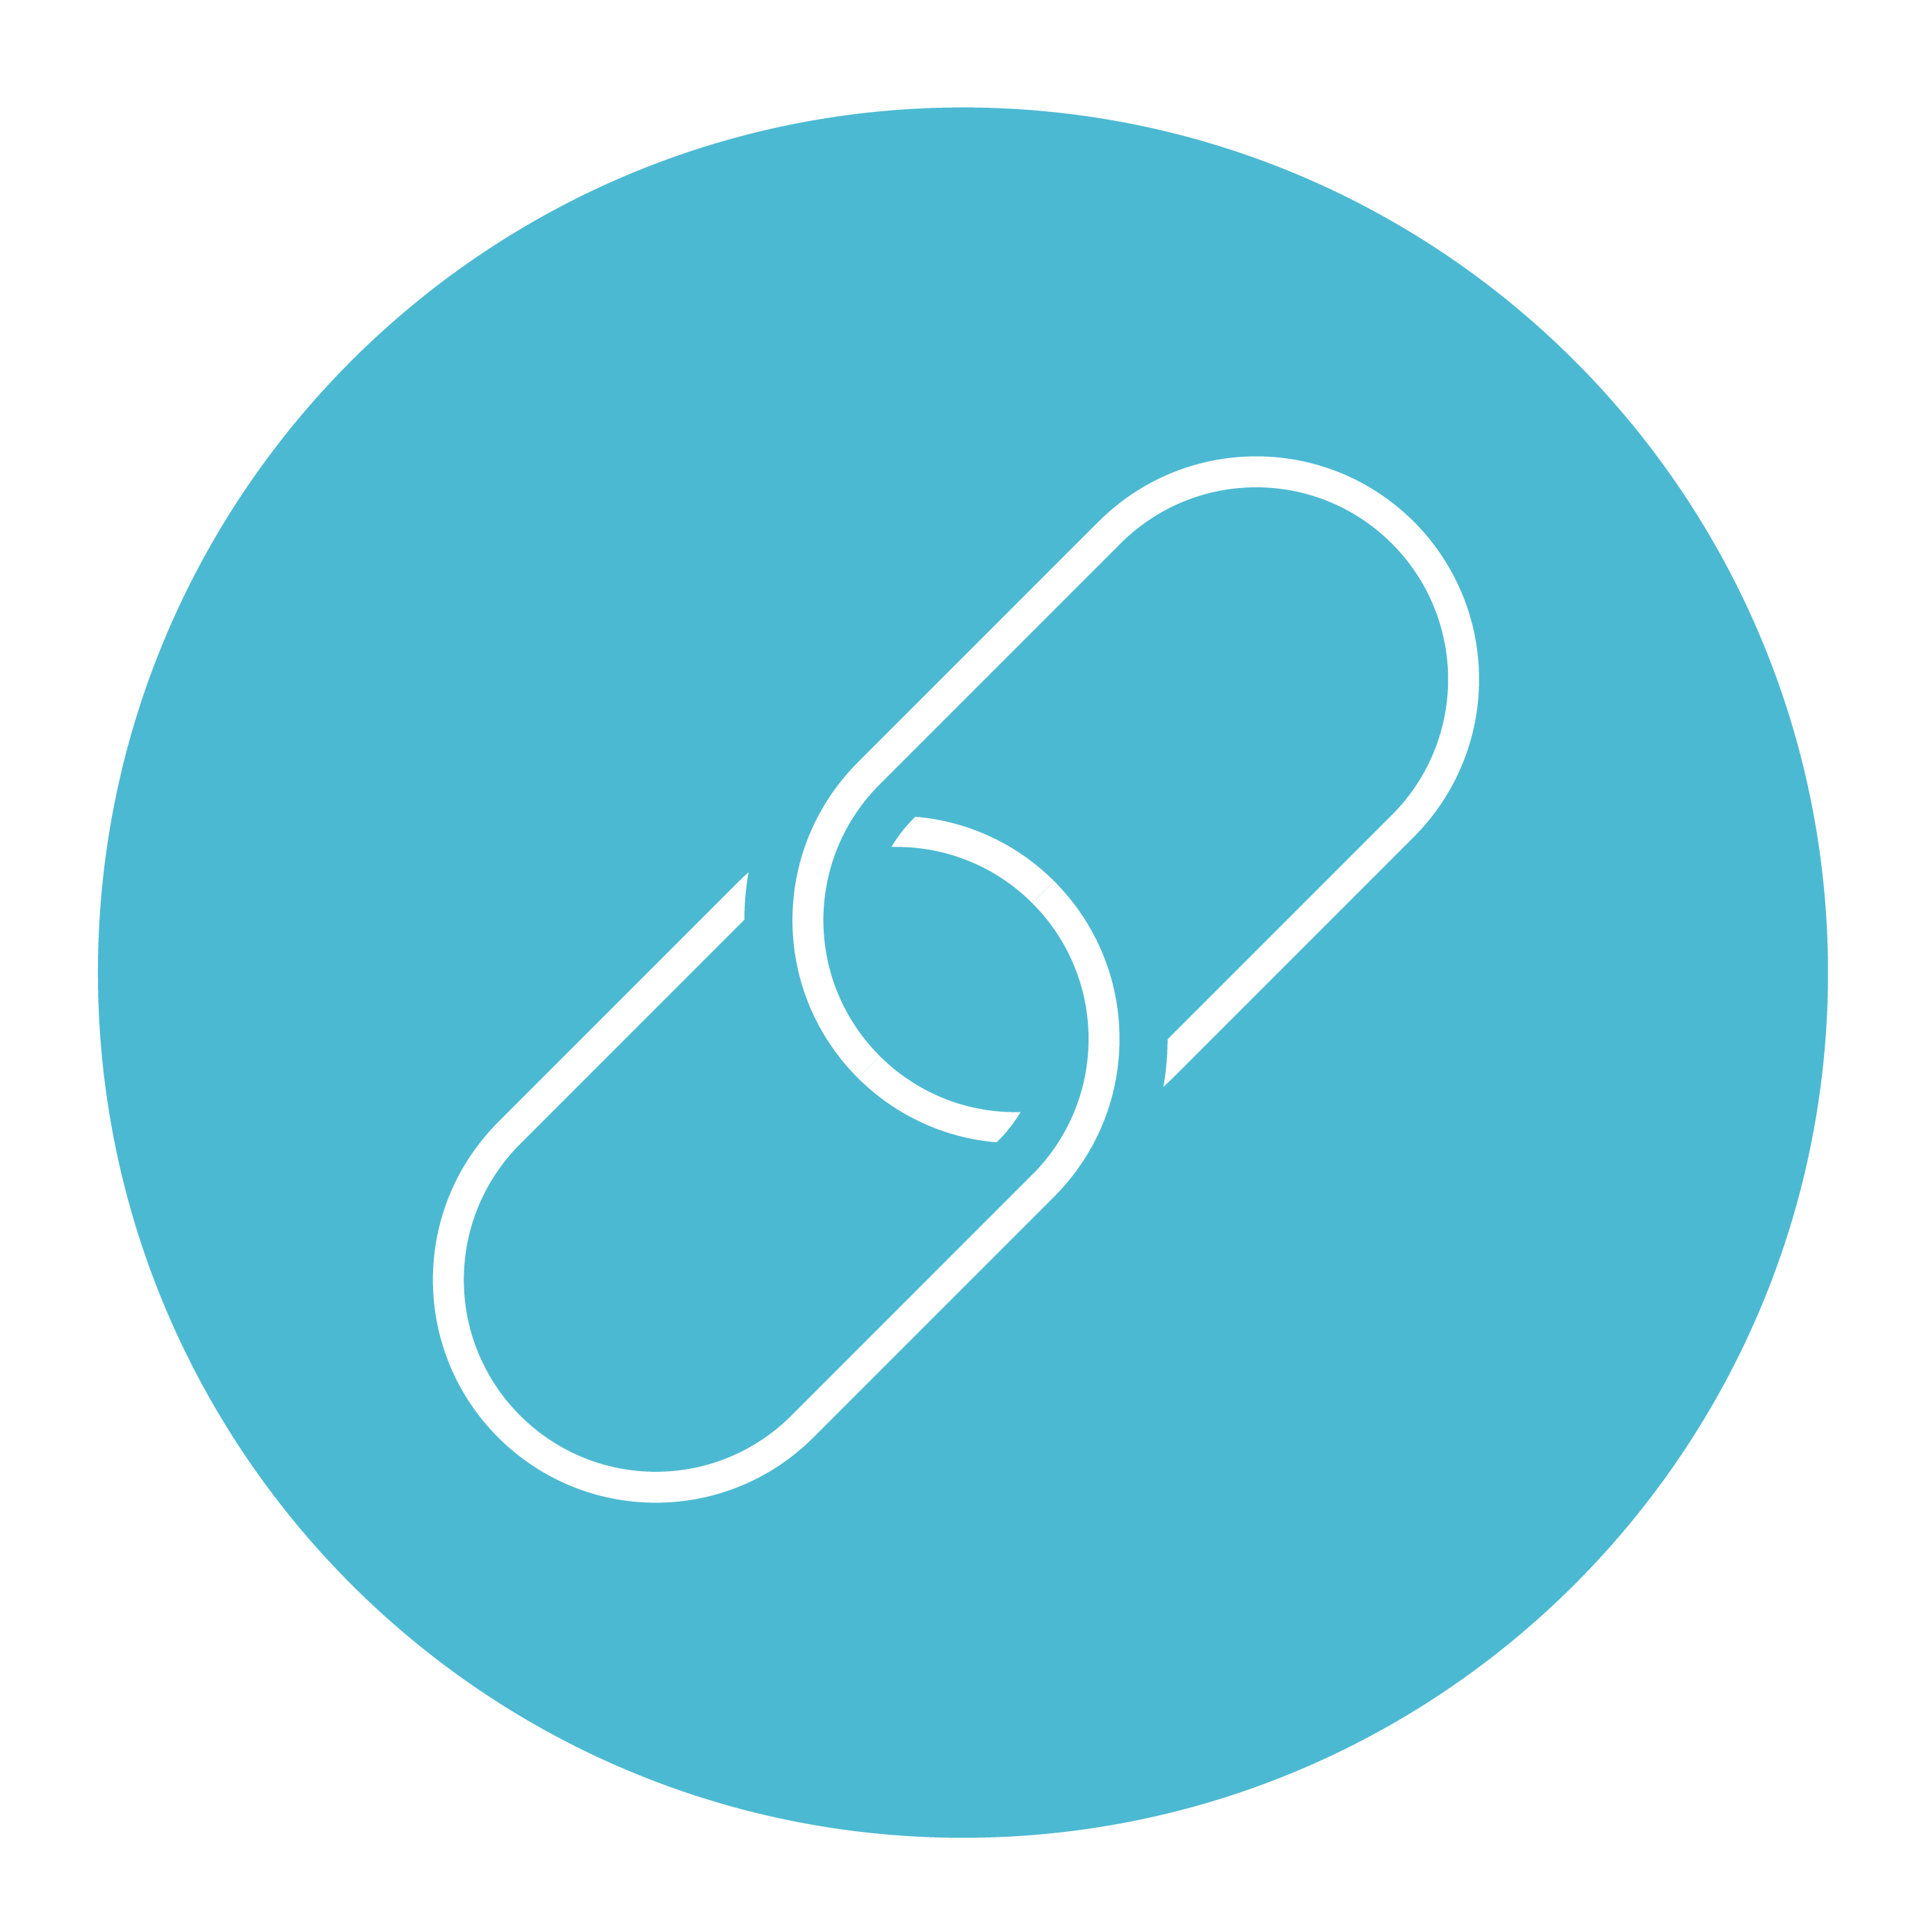 Blue icon of an outline of a hyperlink symbol